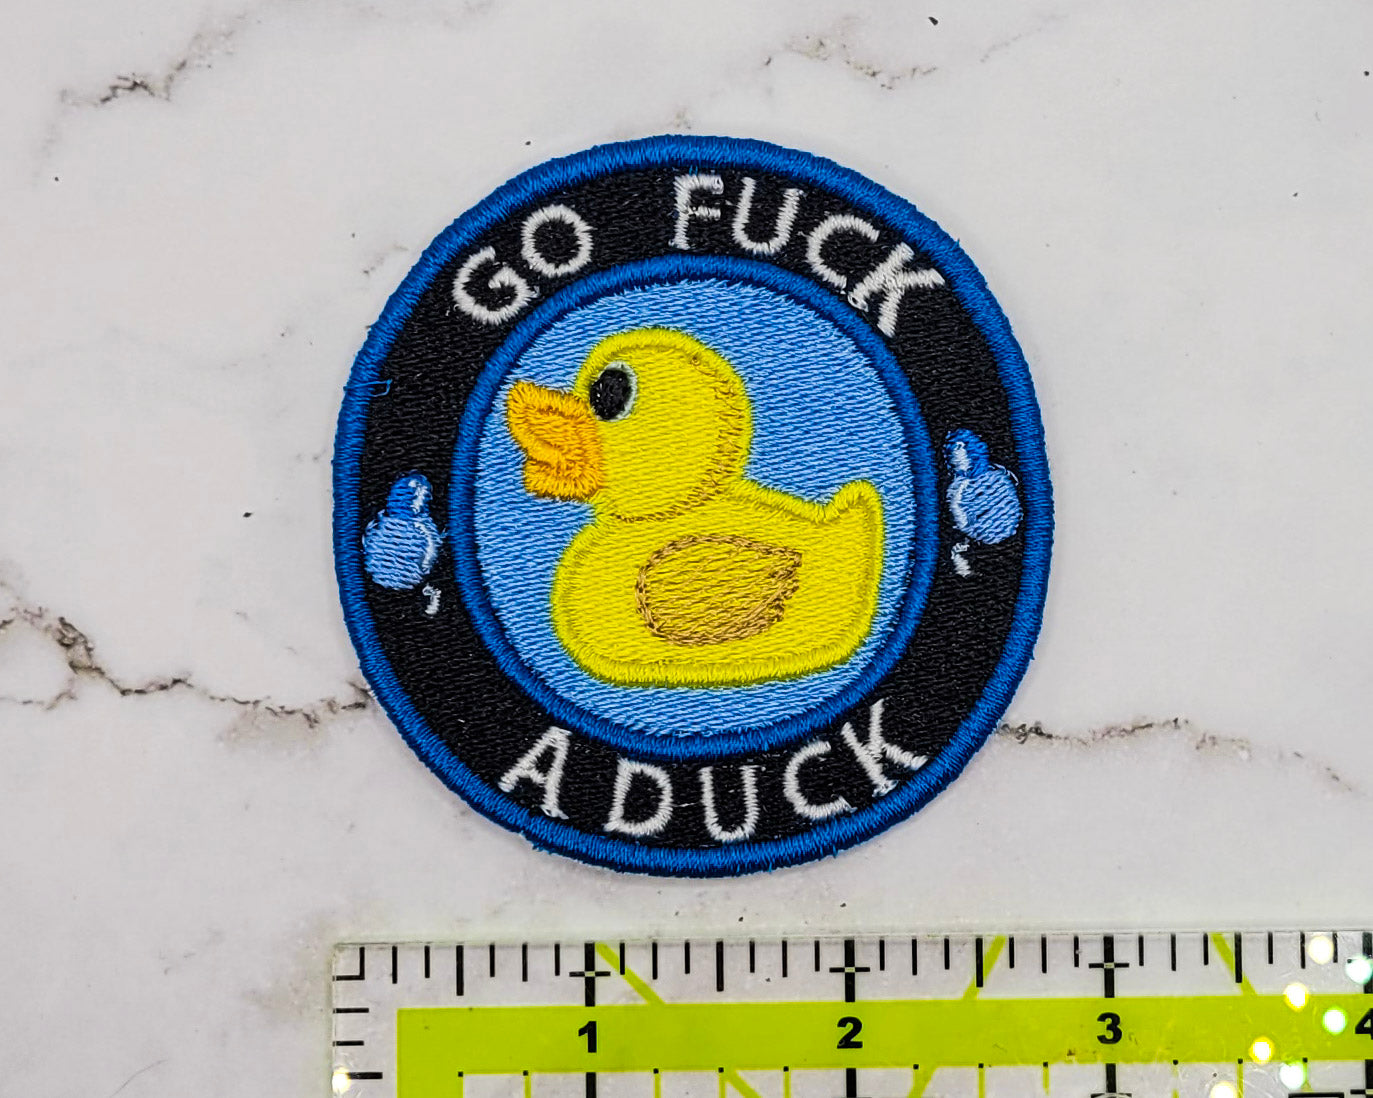 Go Fuck a Duck Embroidered Patch